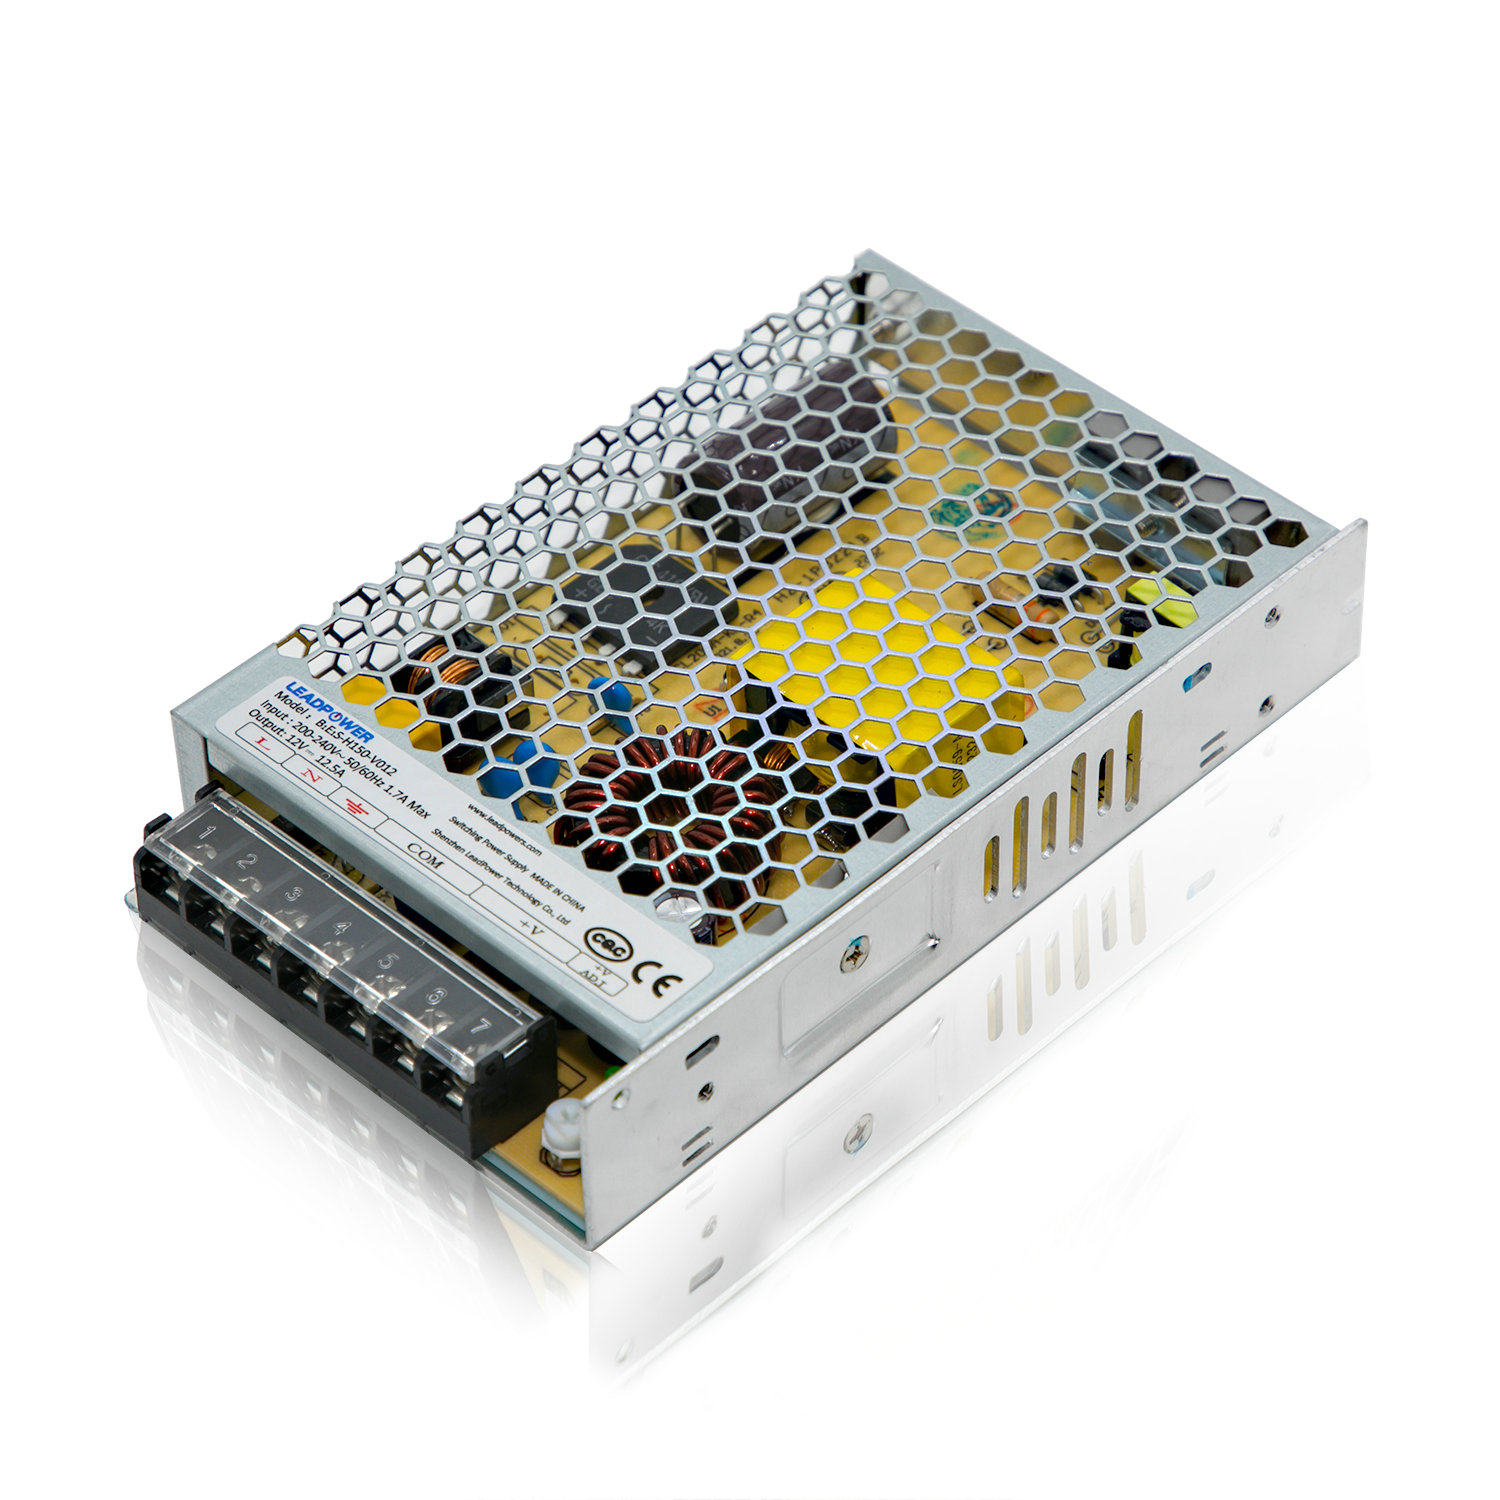 BBN-H150 Series Built in LED Power Supply